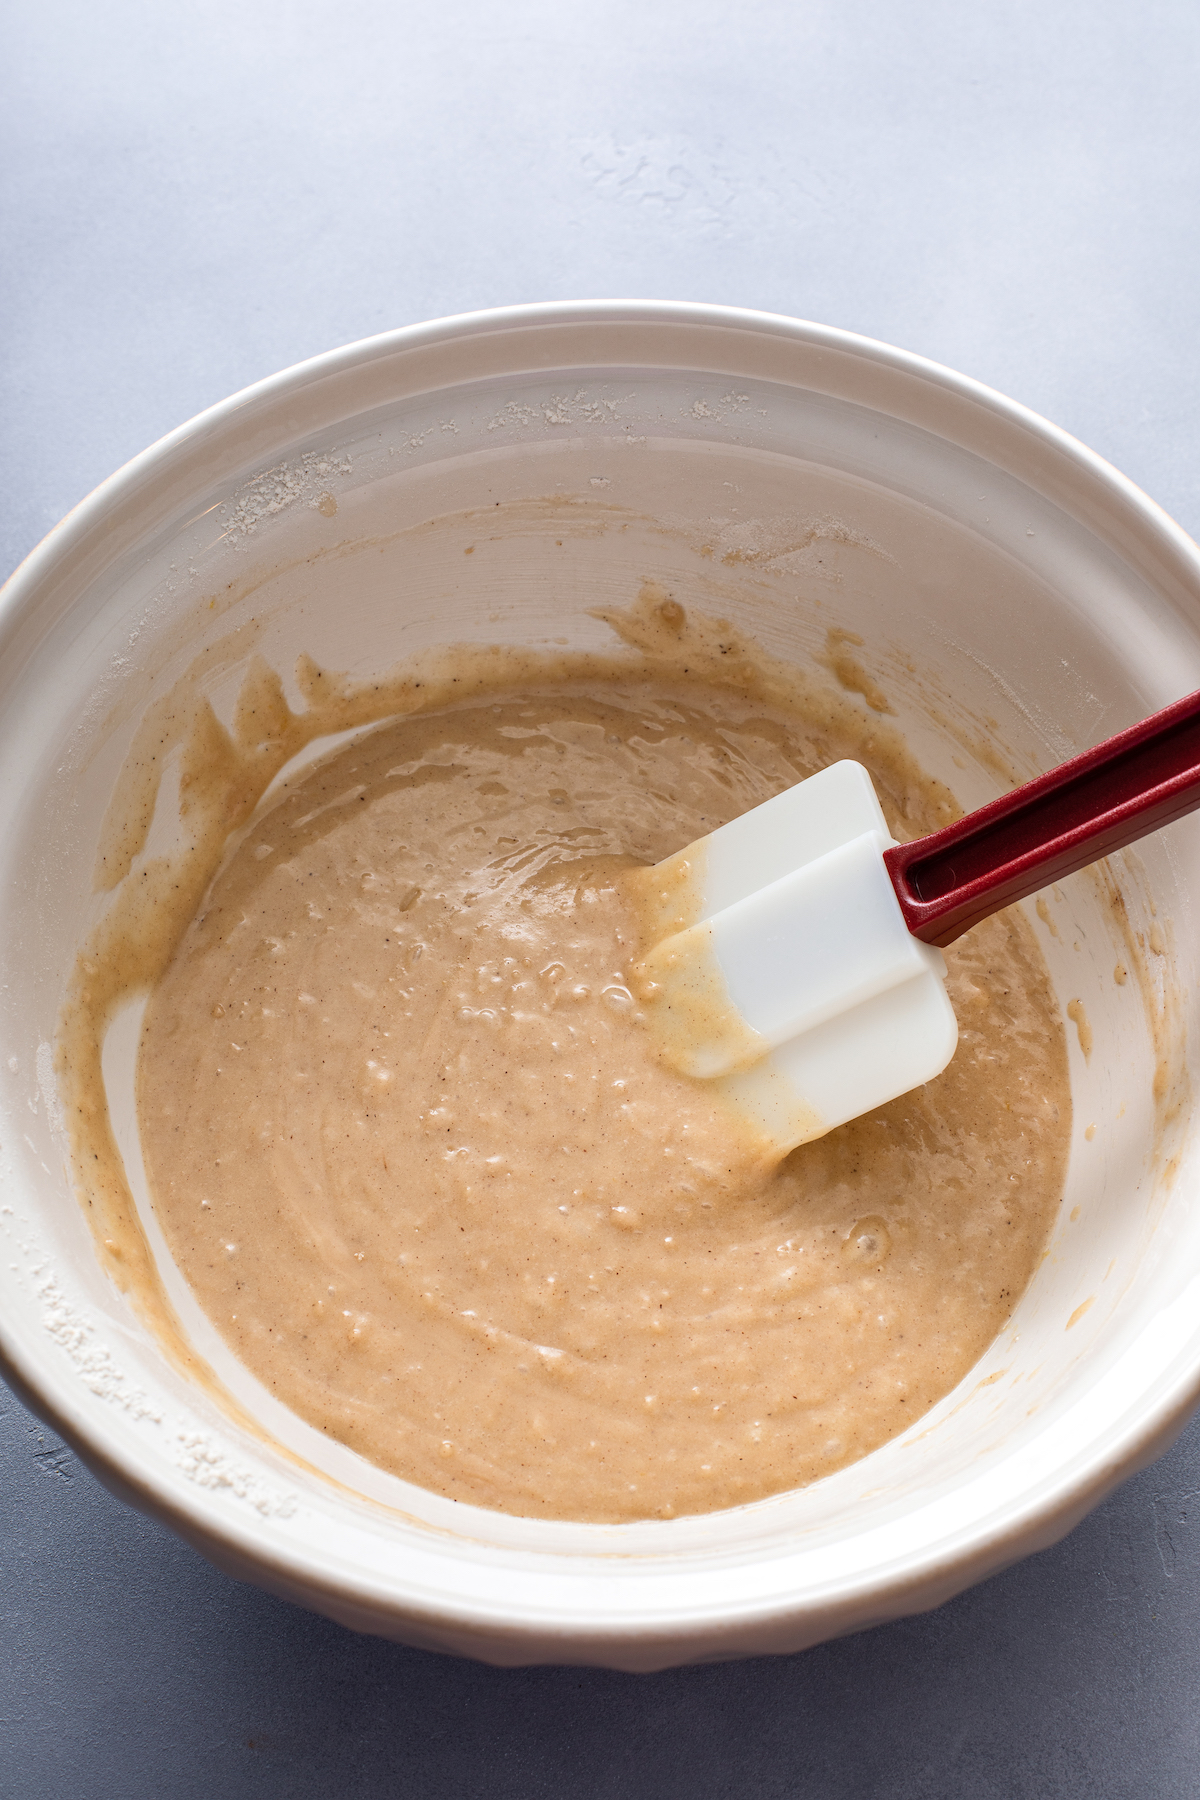 Muffin batter in a mixing bowl.